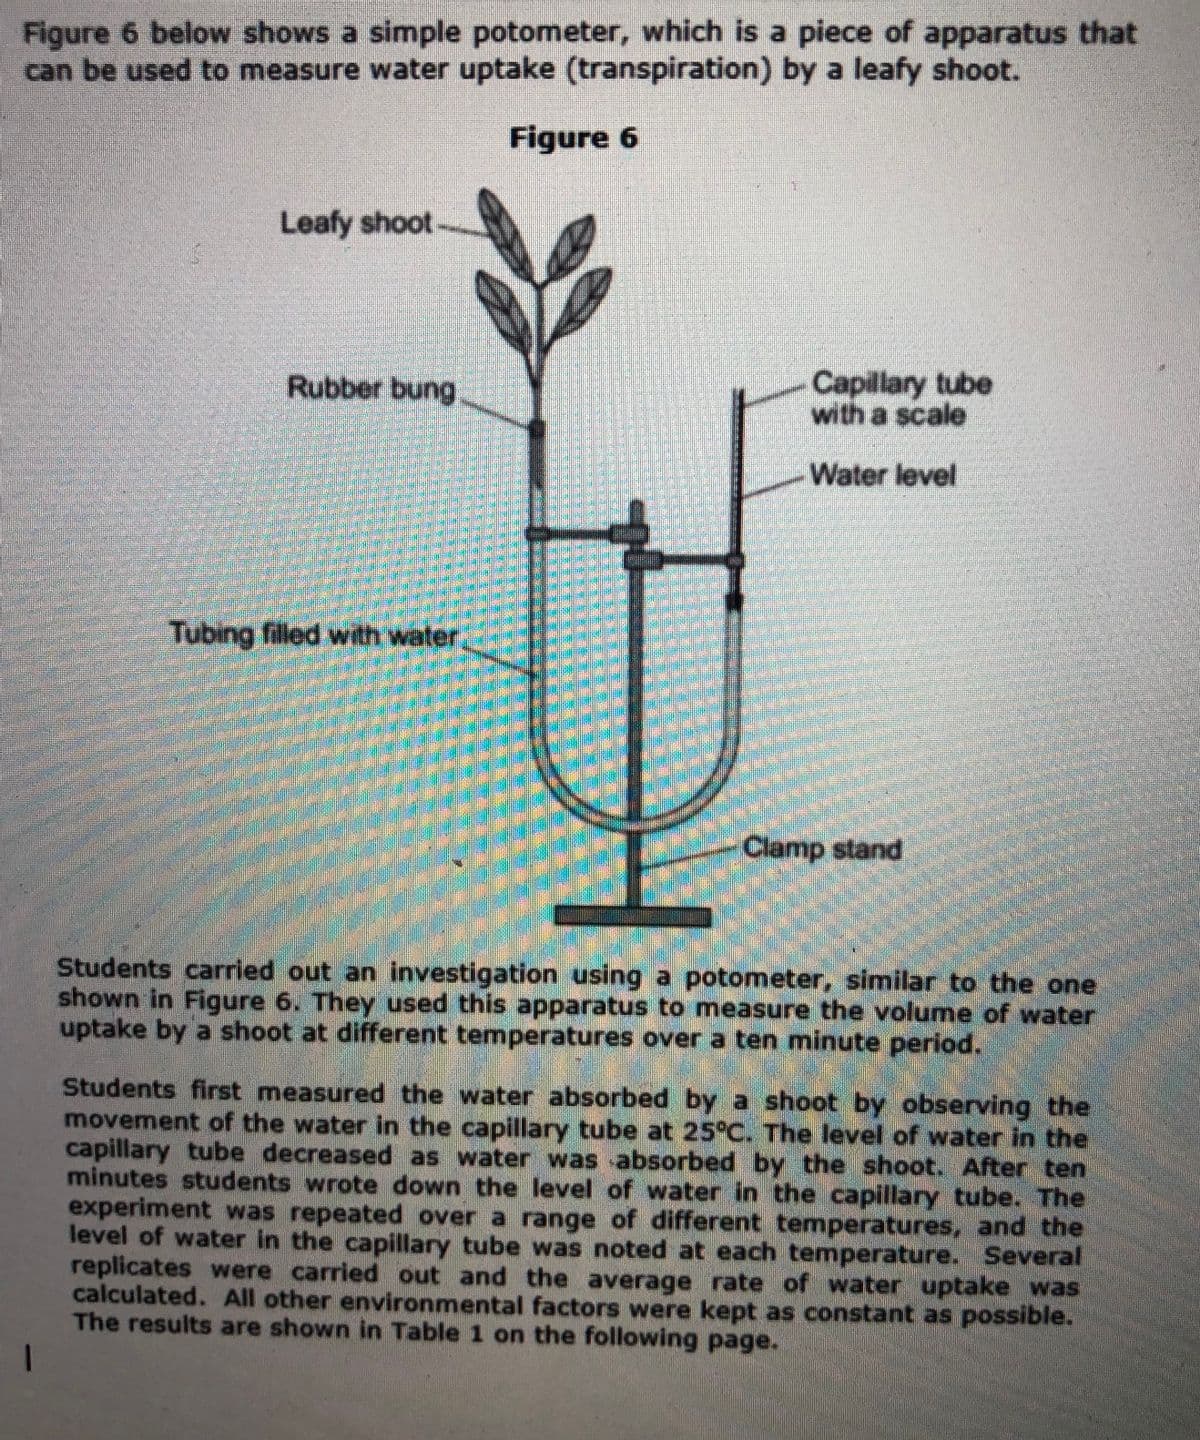 Figure 6 below shows a simple potometer, which is a piece of apparatus that
can be used to measure water uptake (transpiration) by a leafy shoot.
Figure 6
Leafy shoot
Capillary tube
with a scale
Rubber bung
Water level
Tubing filled with water
-Clamp stand
Students carried out an investigation using a potometer, similar to the one
shown in Figure 6. They used this apparatus to measure the volume of water
uptake by a shoot at different temperatures over a ten minute period.
Students first measured the water absorbed by a shoot by observing the
movement of the water in the capillary tube at 25°C. The level of water in the
capillary tube decreased as water was absorbed by the shoot. After ten
minutes students wrote down the level of water in the capillary tube. The
experiment was repeated over a range of different temperatures, and the
level of water in the capillary tube was noted at each temperature. Several
replicates were carried out and the average rate of water uptake was
calculated. All other environmental factors were kept as constant as possible.
The results are shown in Table 1 on the following page.
1
